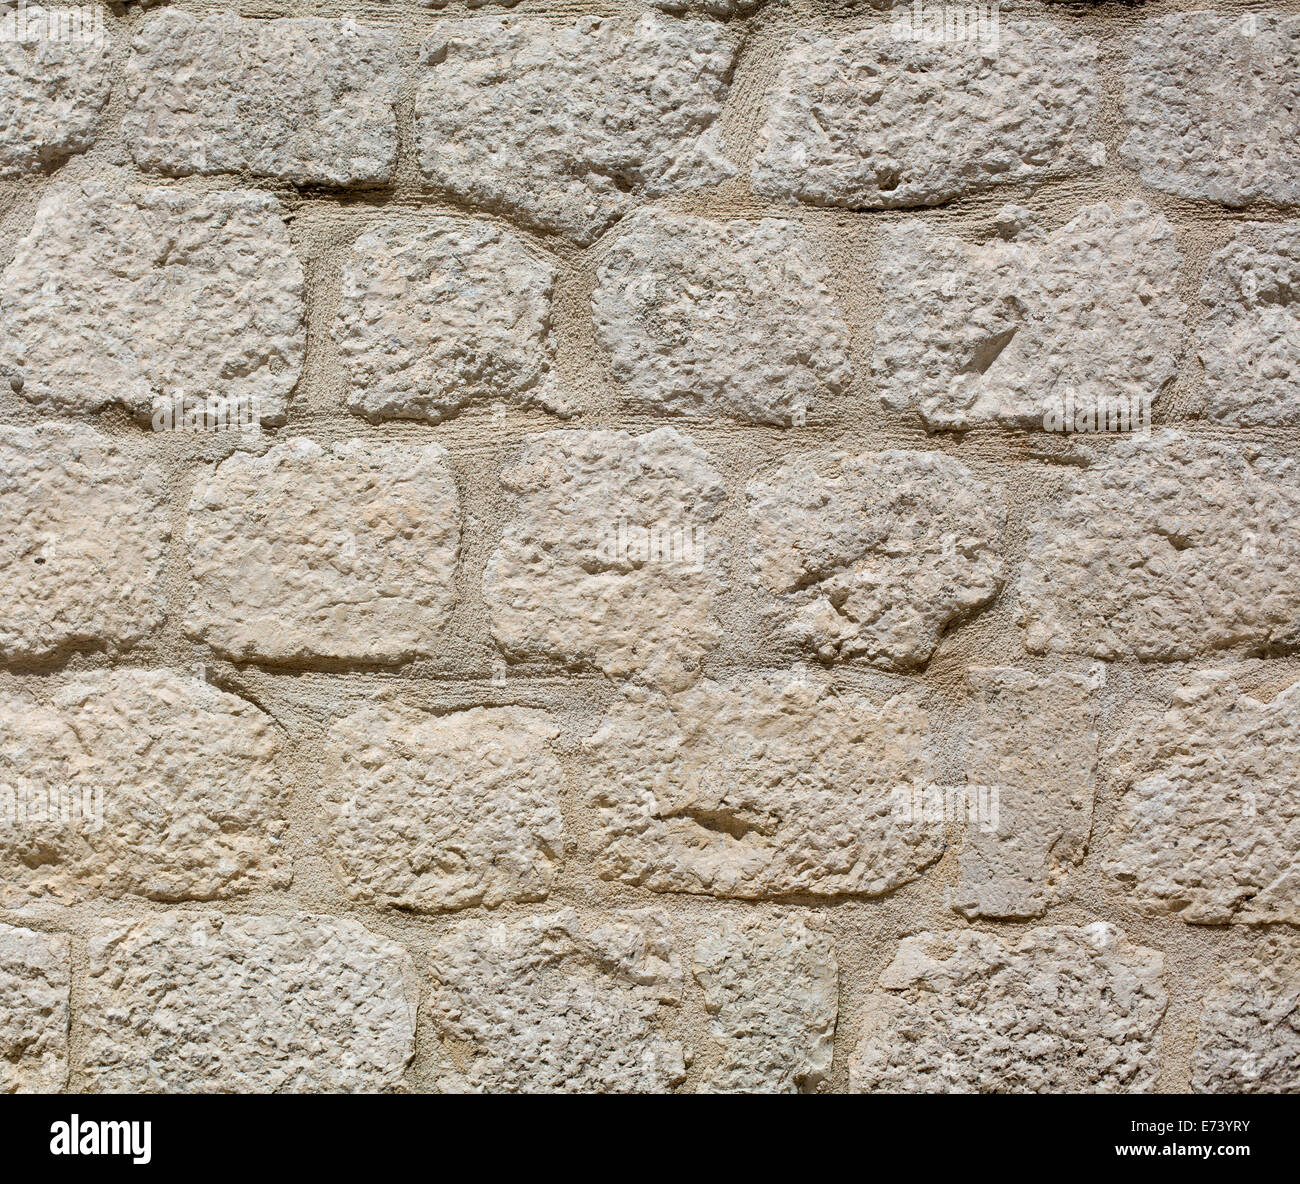 Stone Wall background Banque D'Images